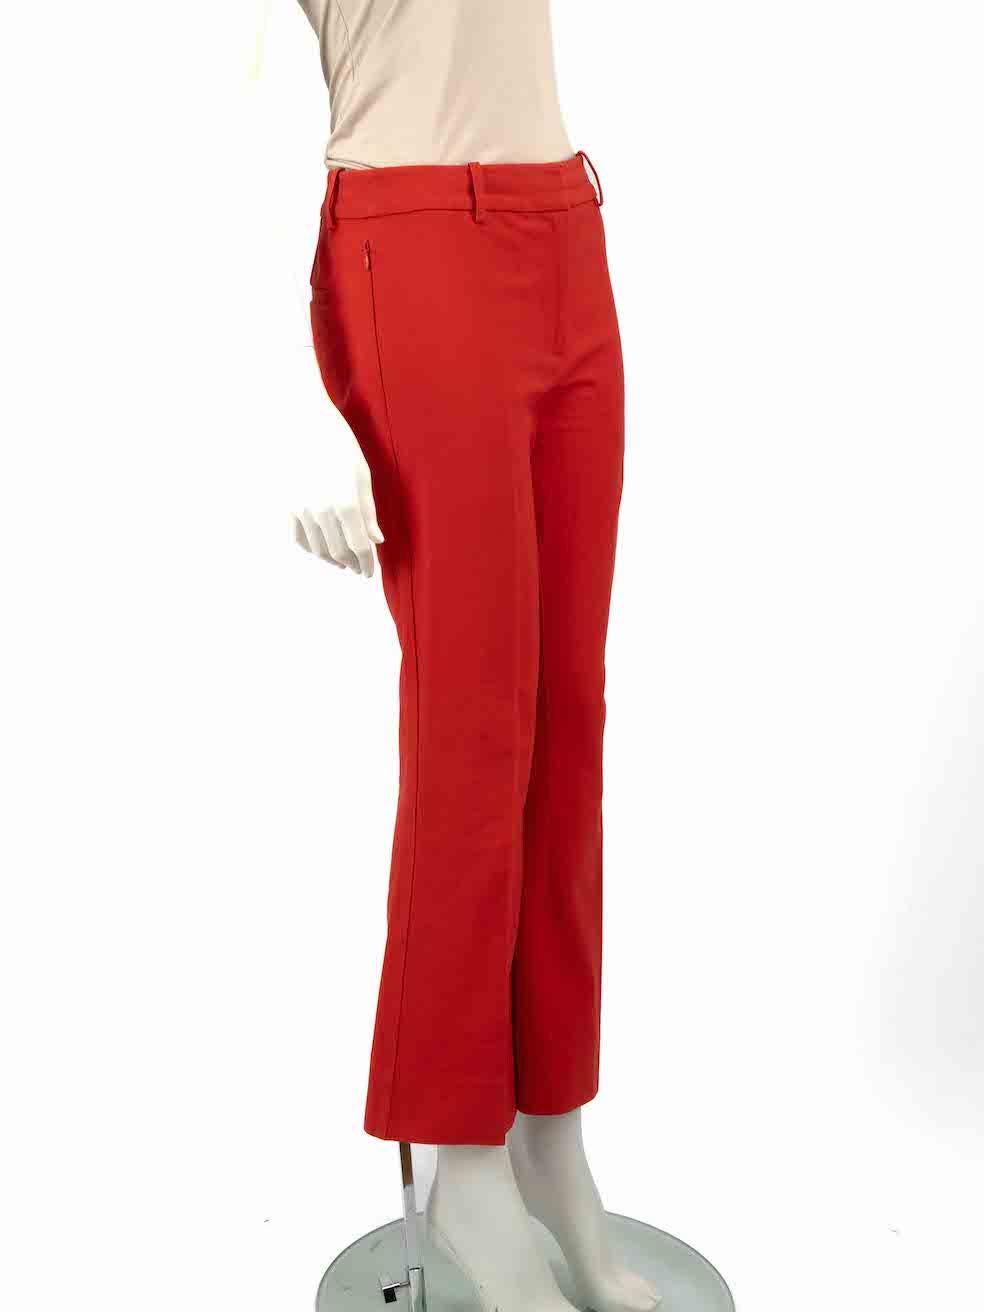 CONDITION is Good. Minor wear to trousers is evident. Light discolouration to front and back waistband as well as both leg hem on this used Derek Lam 10 Crosby designer resale item.
 
 
 
 Details
 
 
 Red
 
 Cotton
 
 Trousers
 
 Flared
 
 Mid